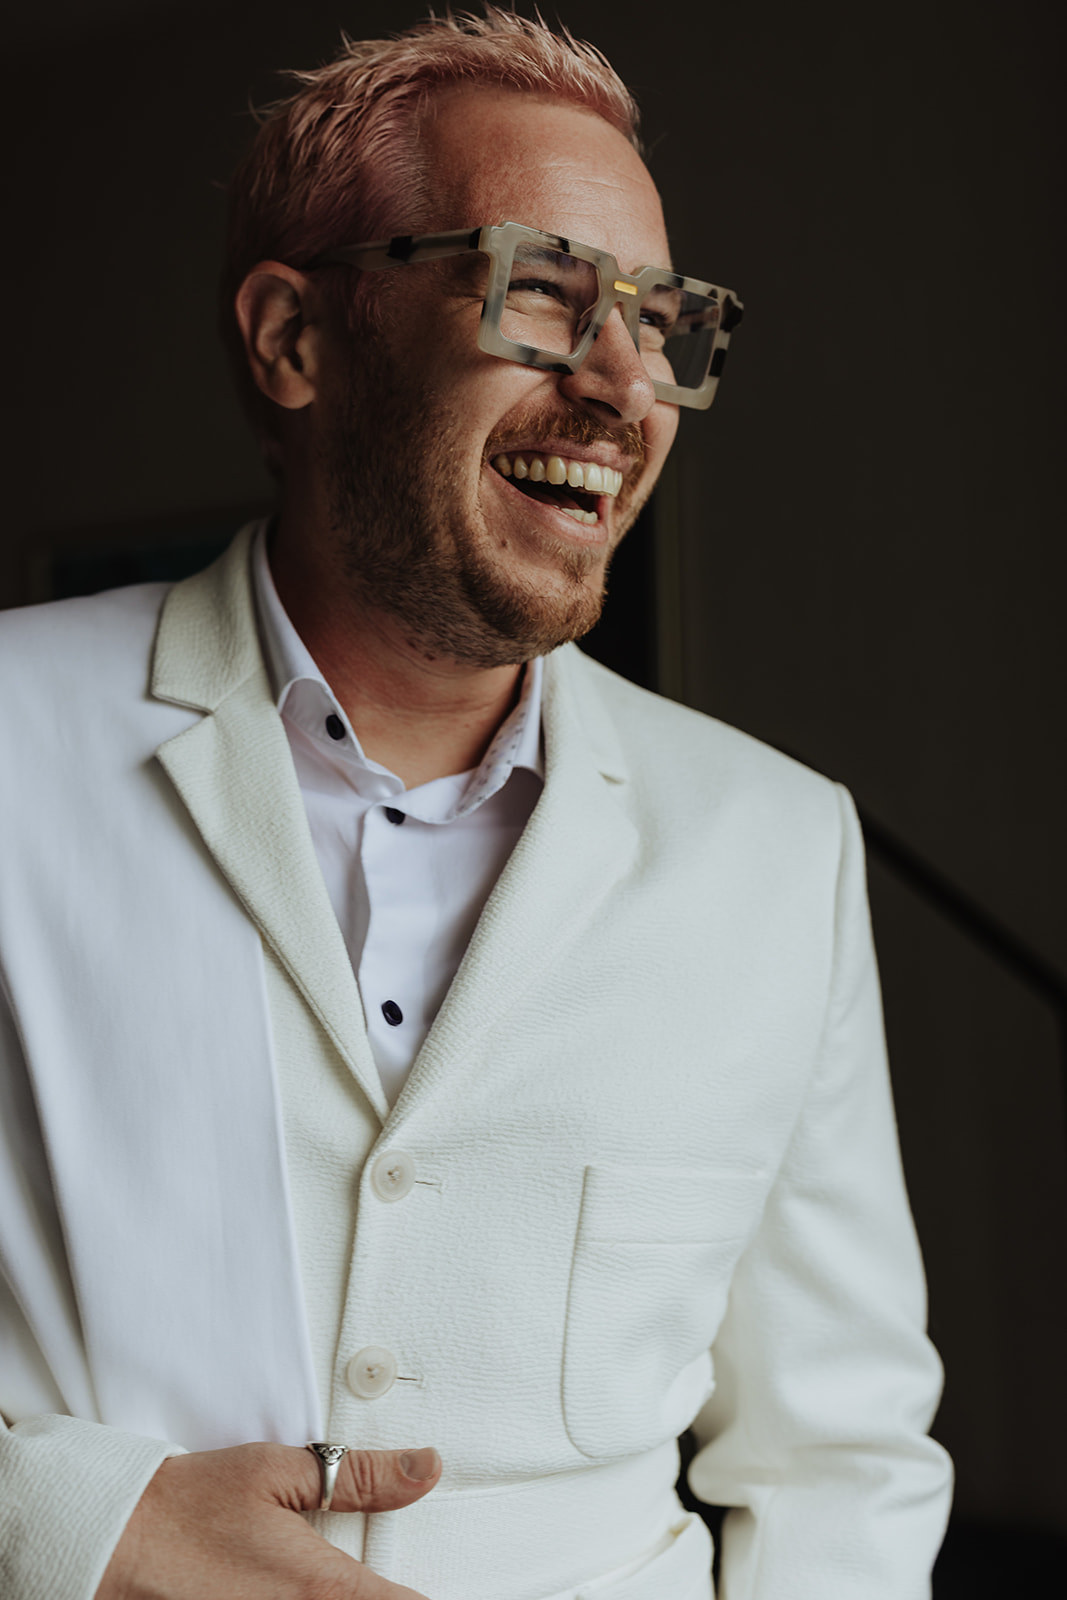 groom wearing white suit and fashion glasses laughing on wedding day